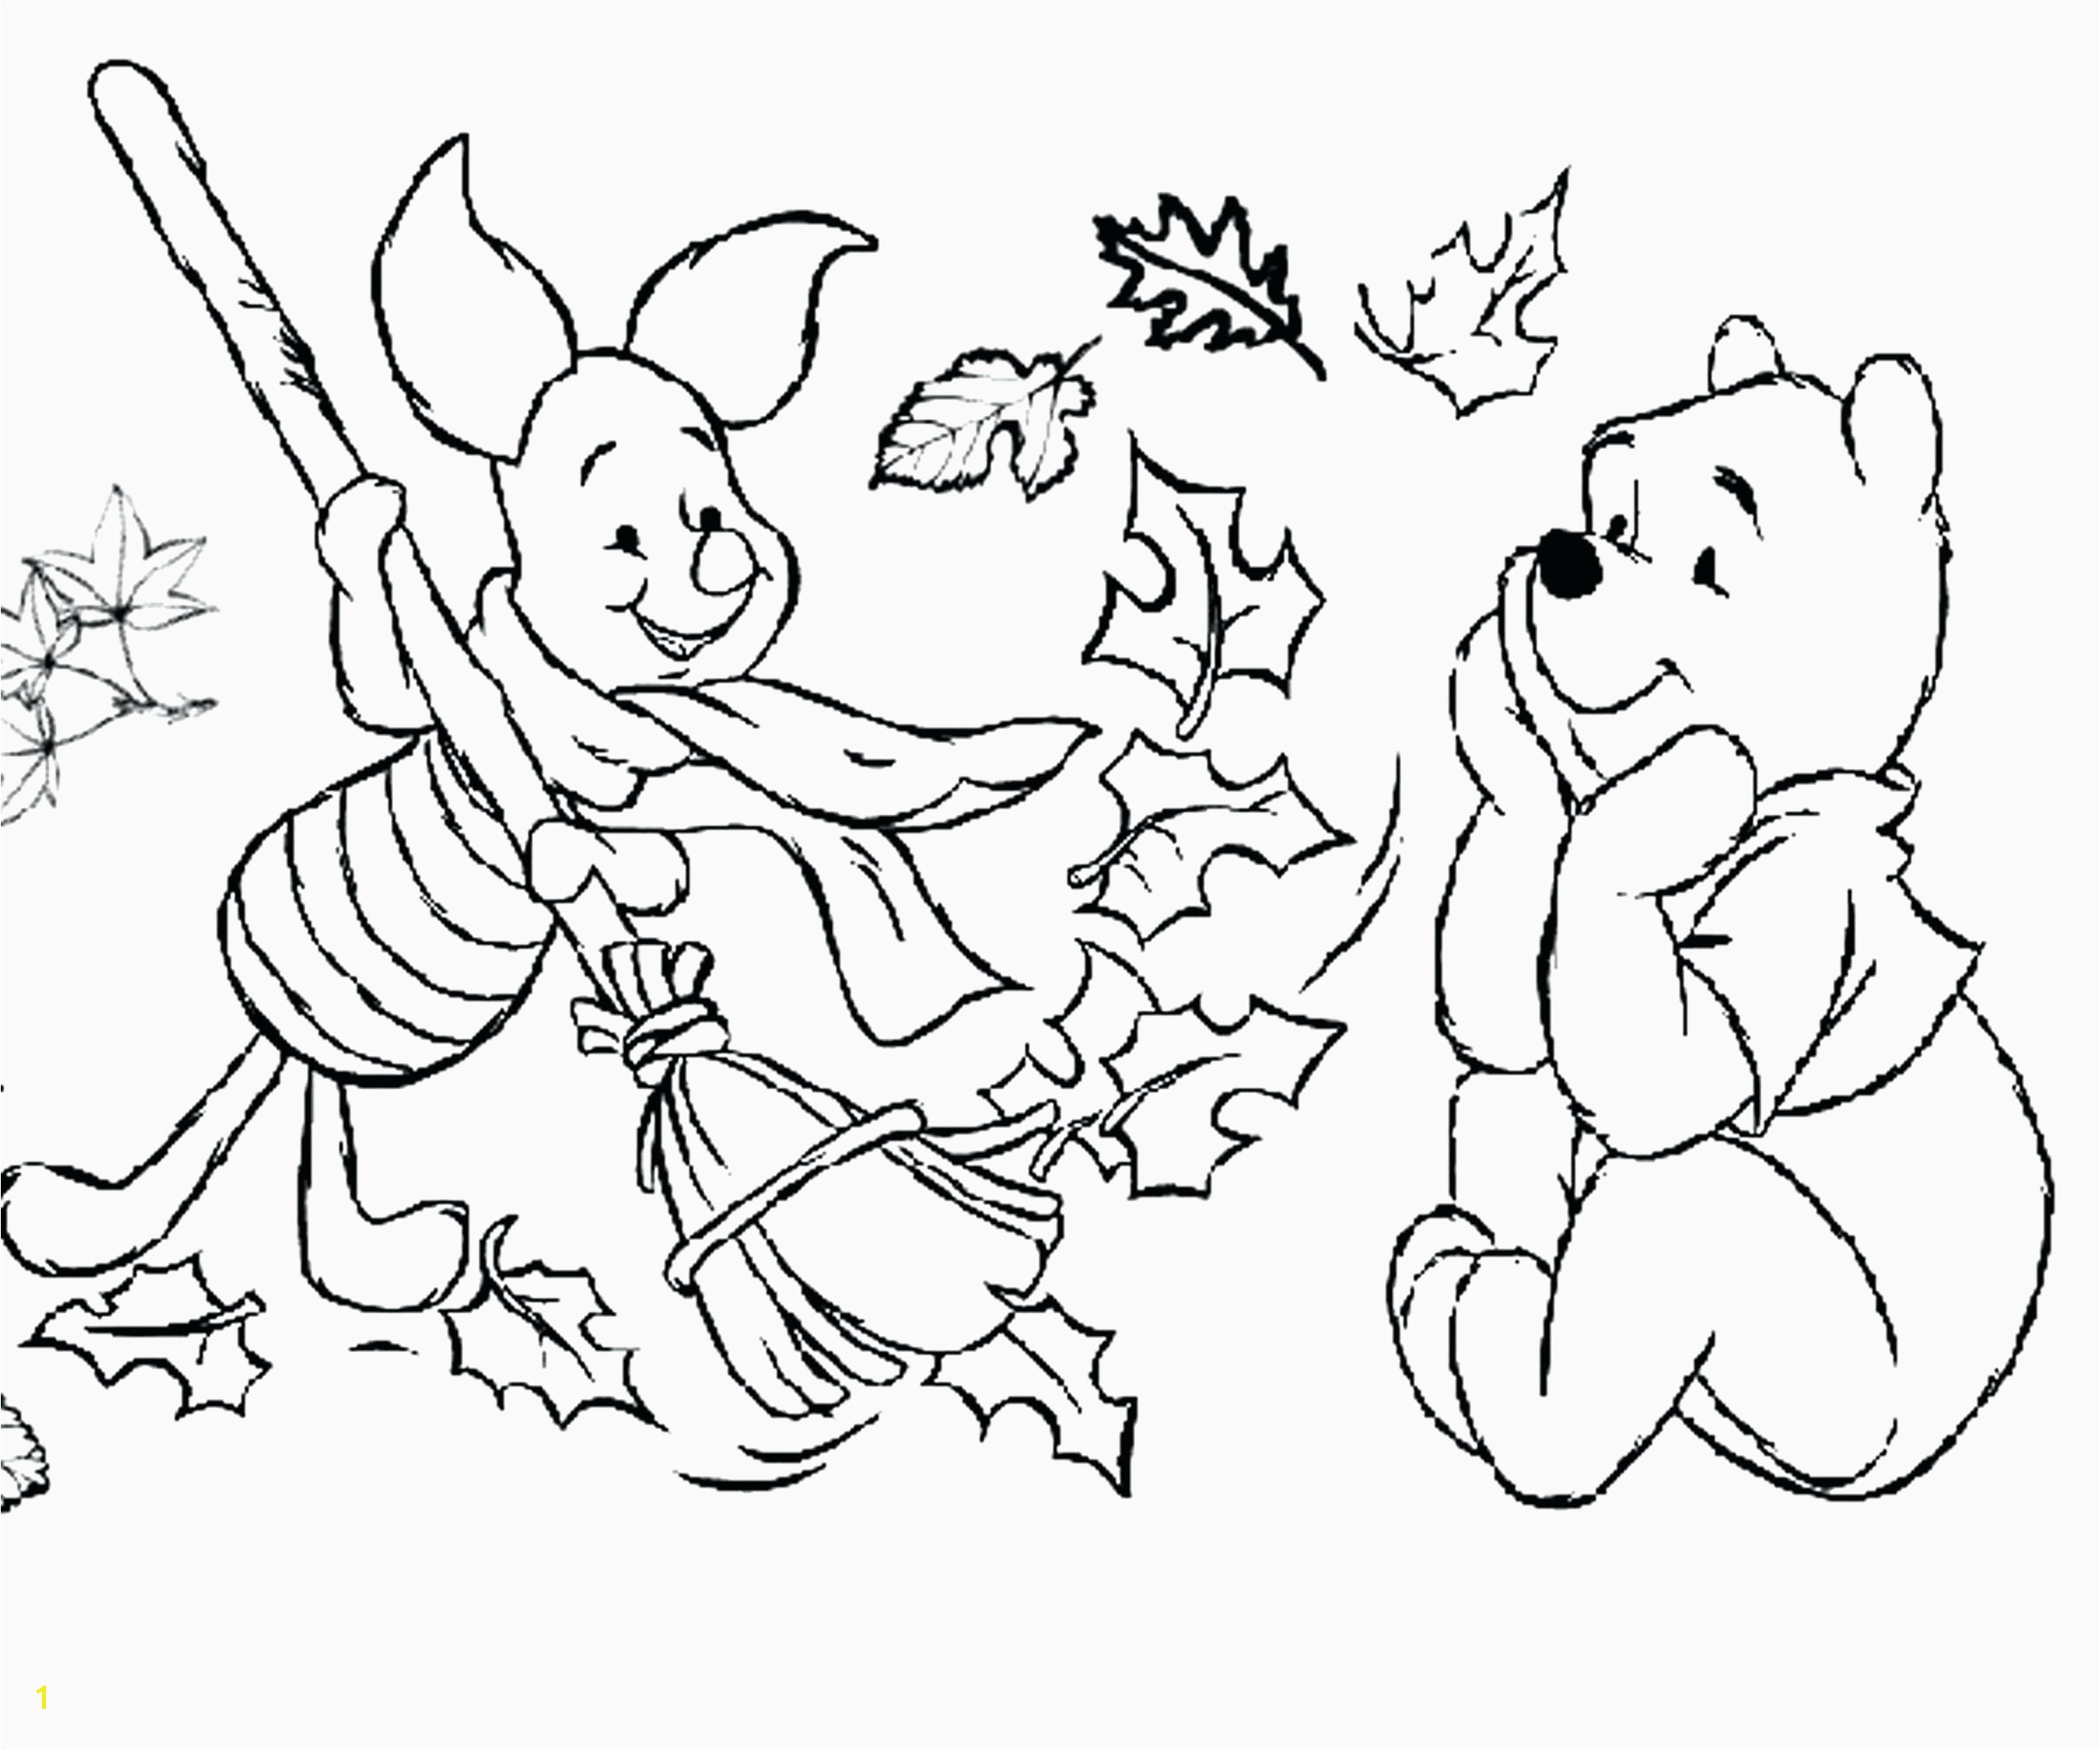 coloring sheet of children colouring pages kids 0d coloring page fall coloring pages for kids inspirational coloring pages